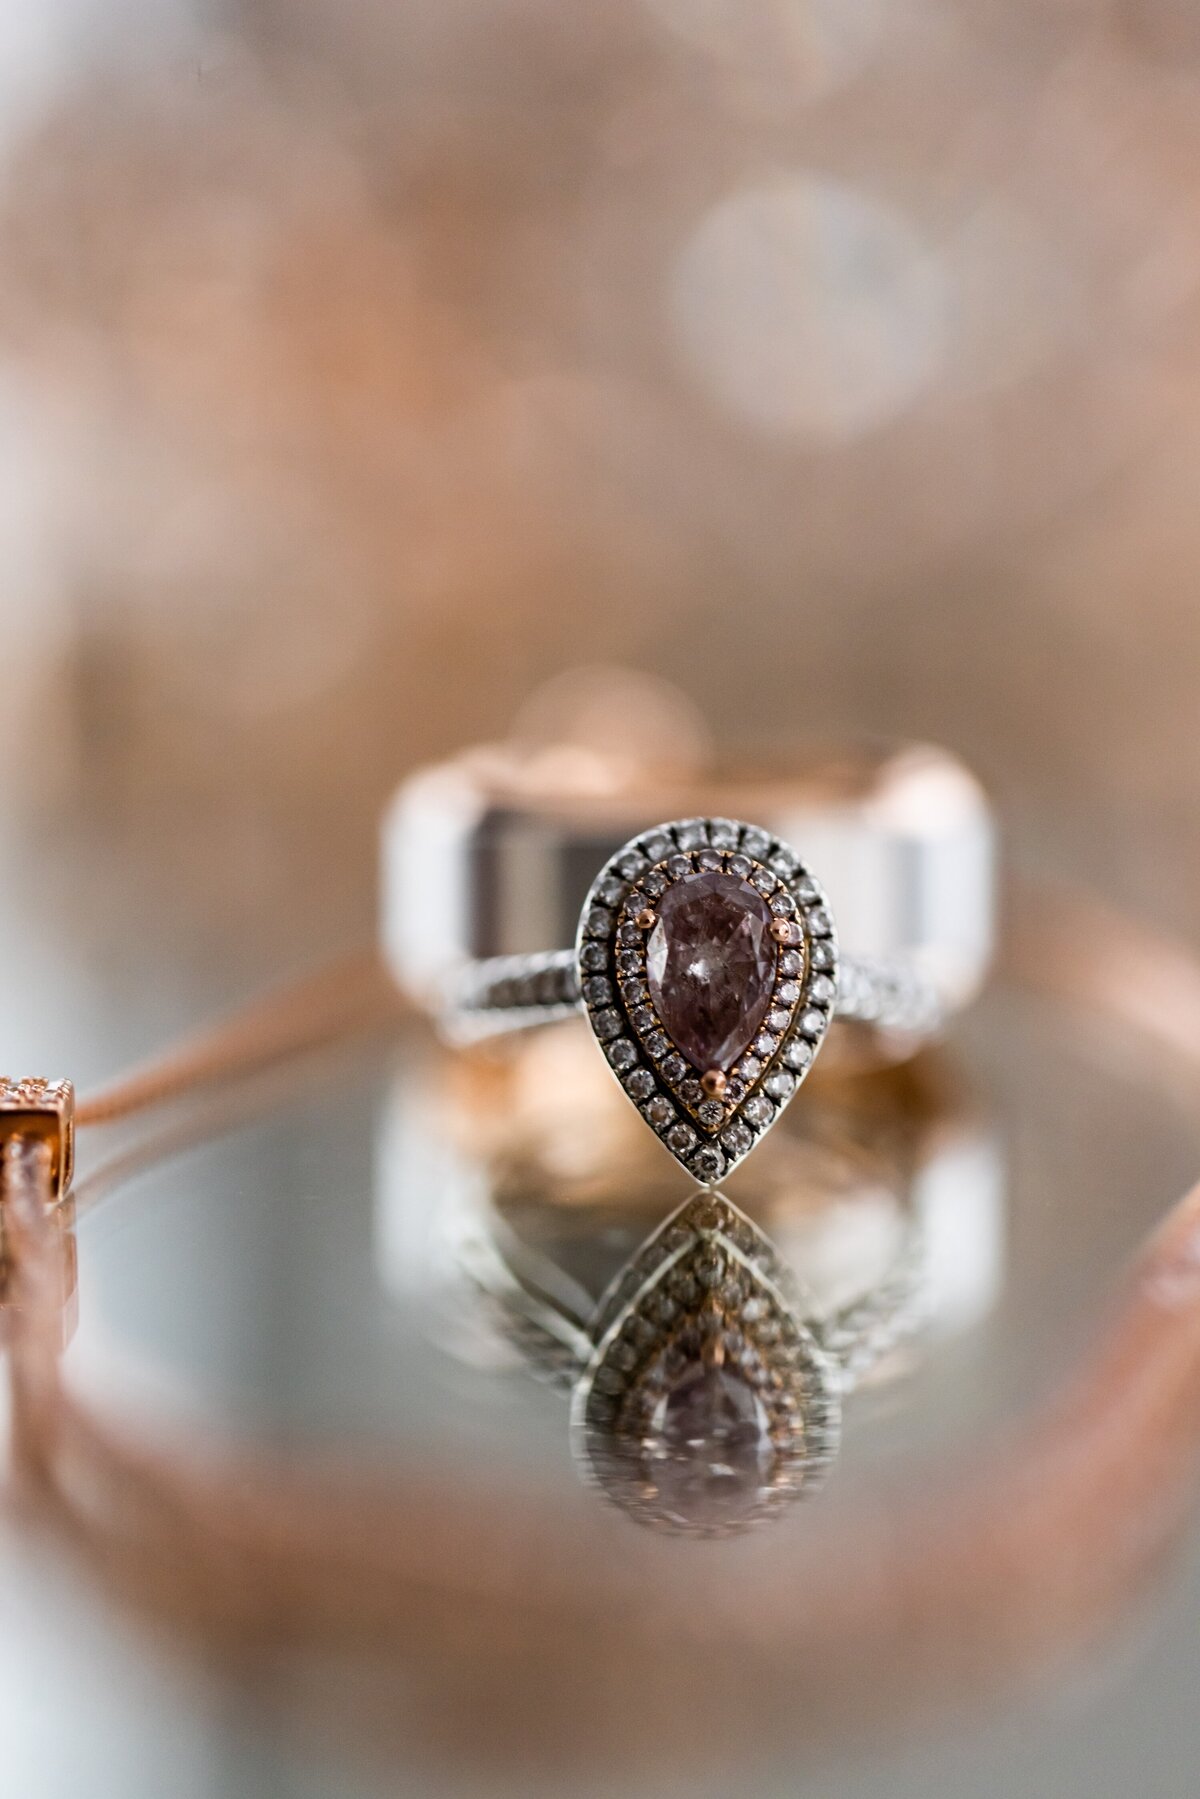 This exquisite macro photograph showcases a wedding ring poised on a reflective surface, capturing the profound elegance and timeless beauty of the symbol. The close-up detail reveals the intricate design and the sparkling brilliance of the diamonds, emphasized by the mirror-like reflection that doubles the visual impact. Ideal for jewelers showcasing their craftsmanship or couples looking for wedding inspiration, this image embodies love's eternal glow and the meticulous attention to detail that goes into every aspect of a wedding.